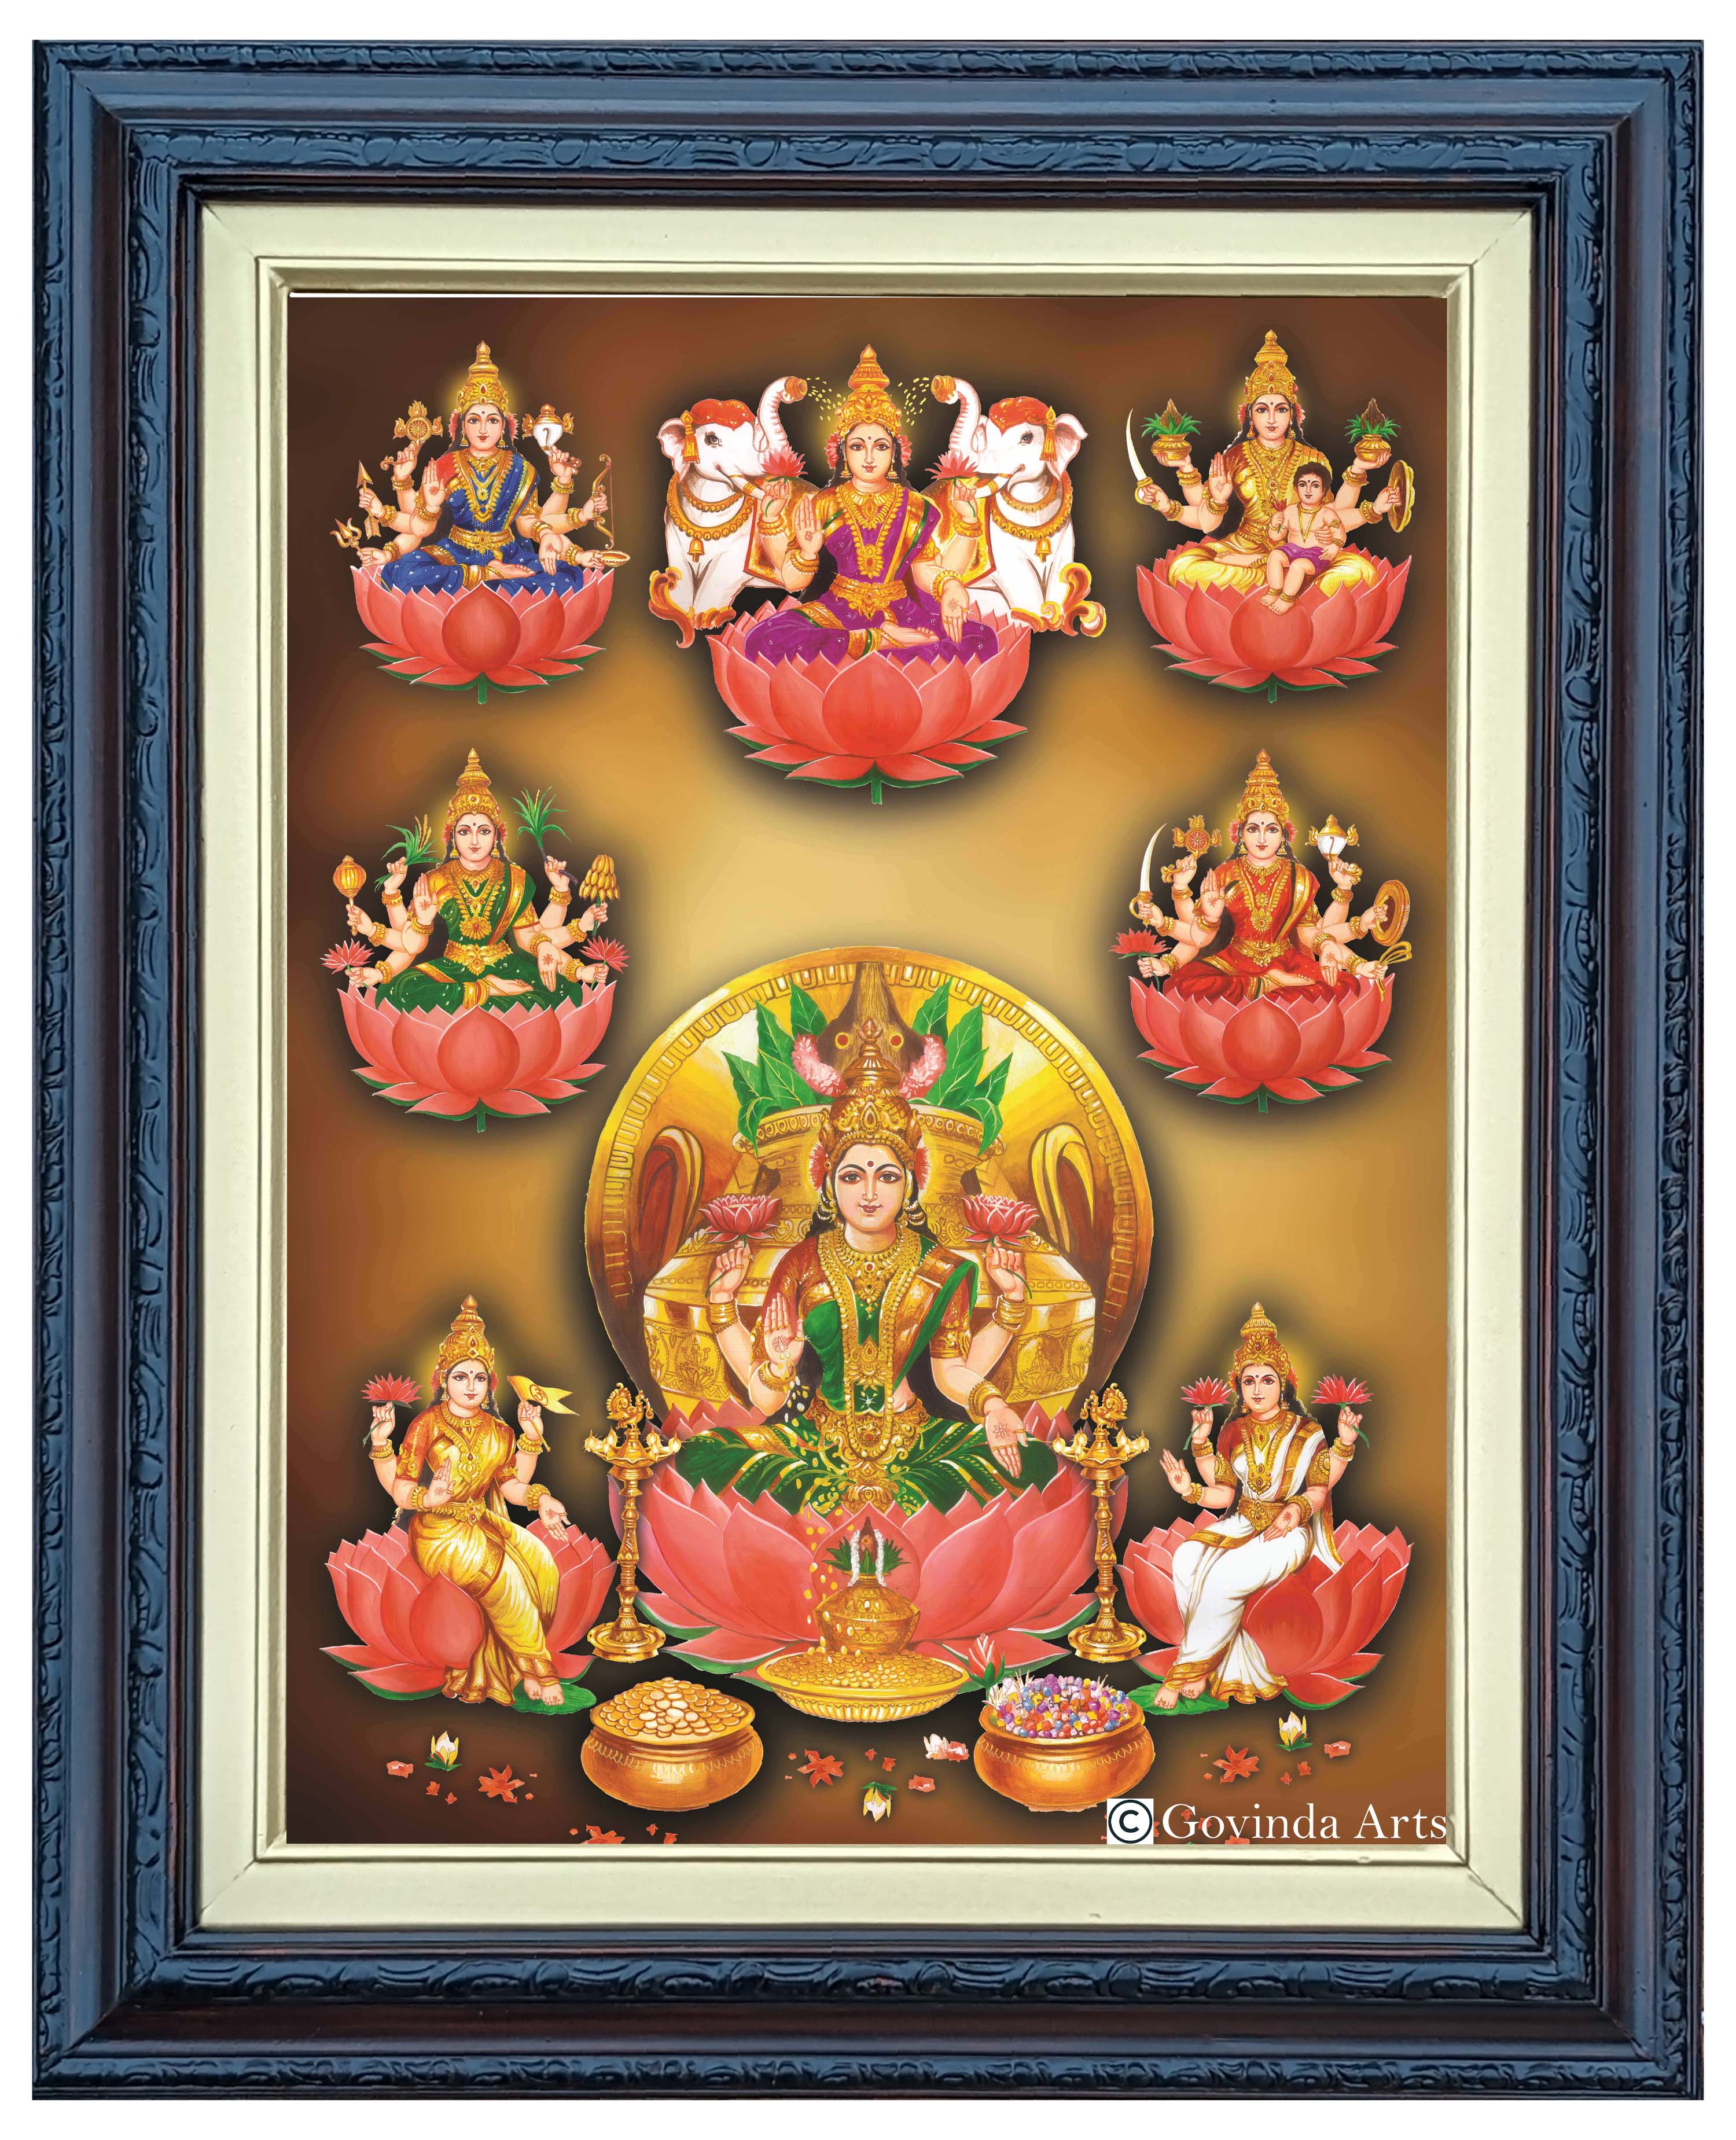 Goddess Asta Lakshmi Painting in Authentic Wood Frame